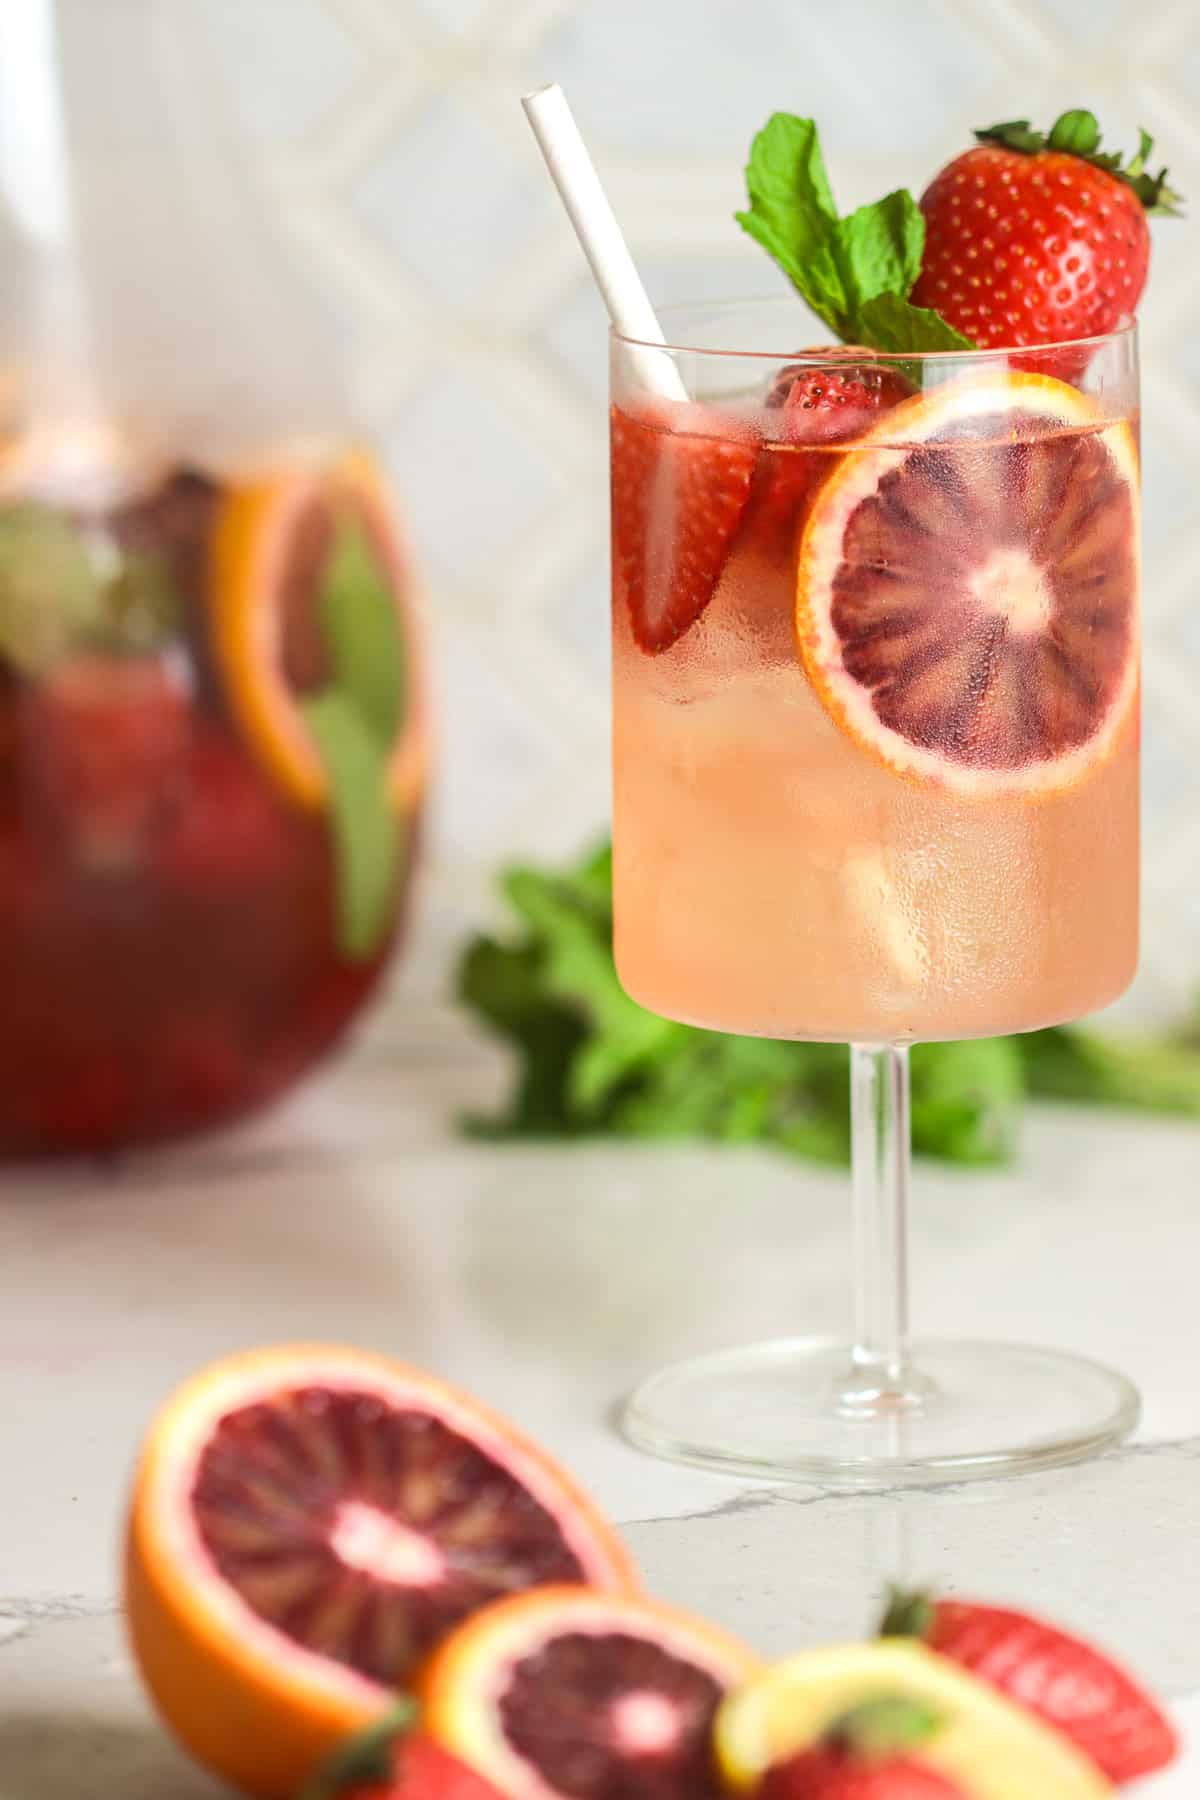 Glass of pink sangria garnished with strawberries and blood orange slices.